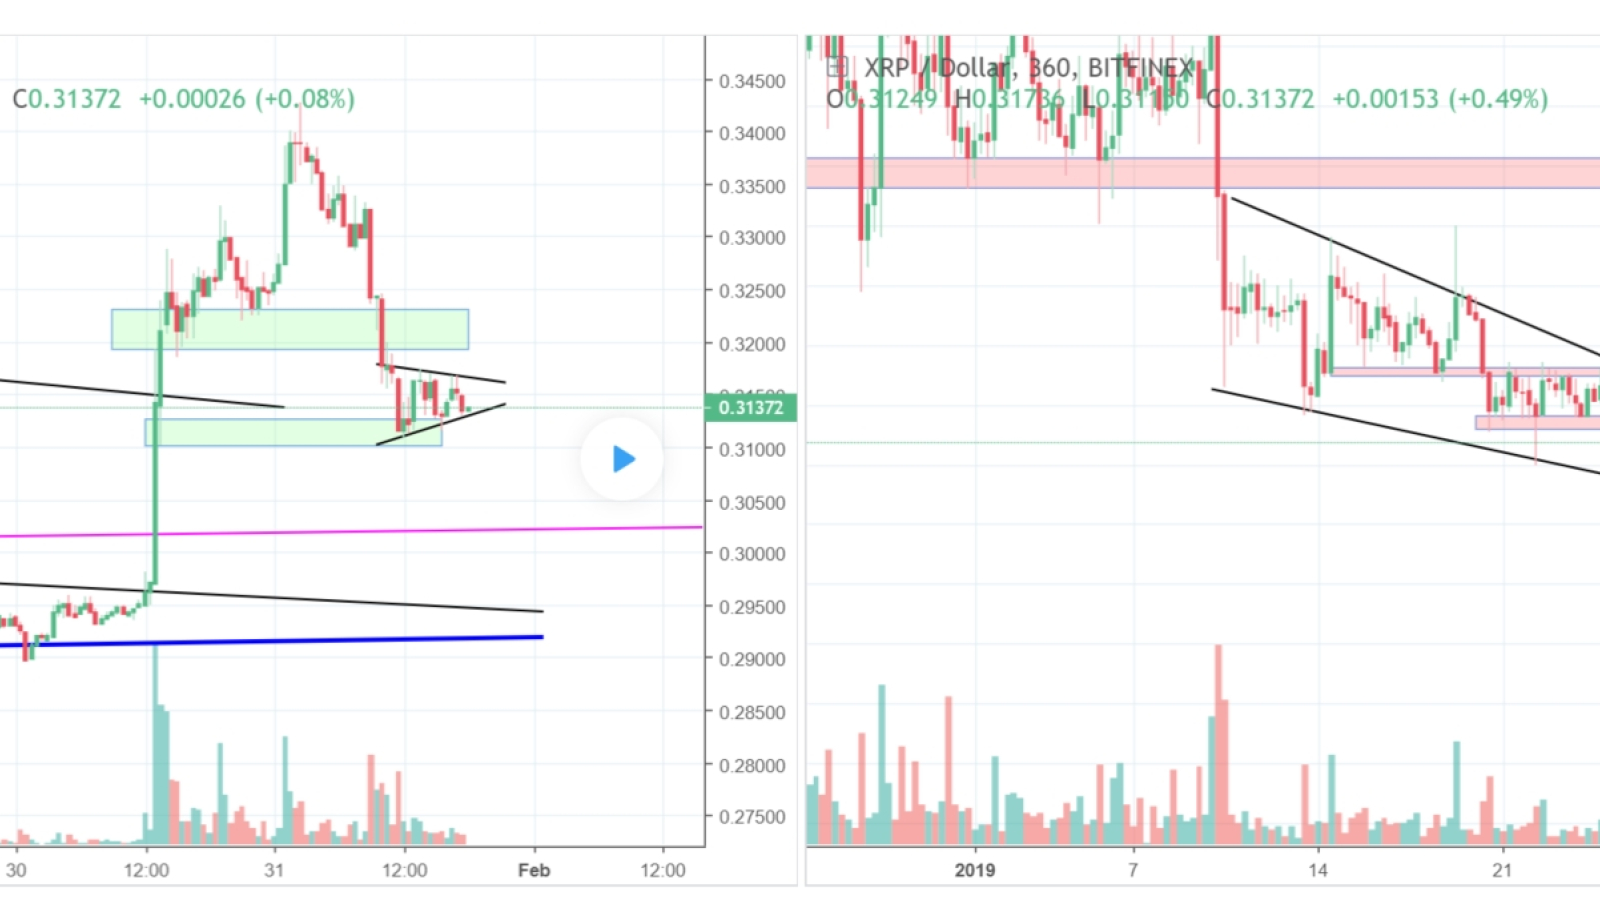 Ripple is expected to stay at its current levels with minor corrections